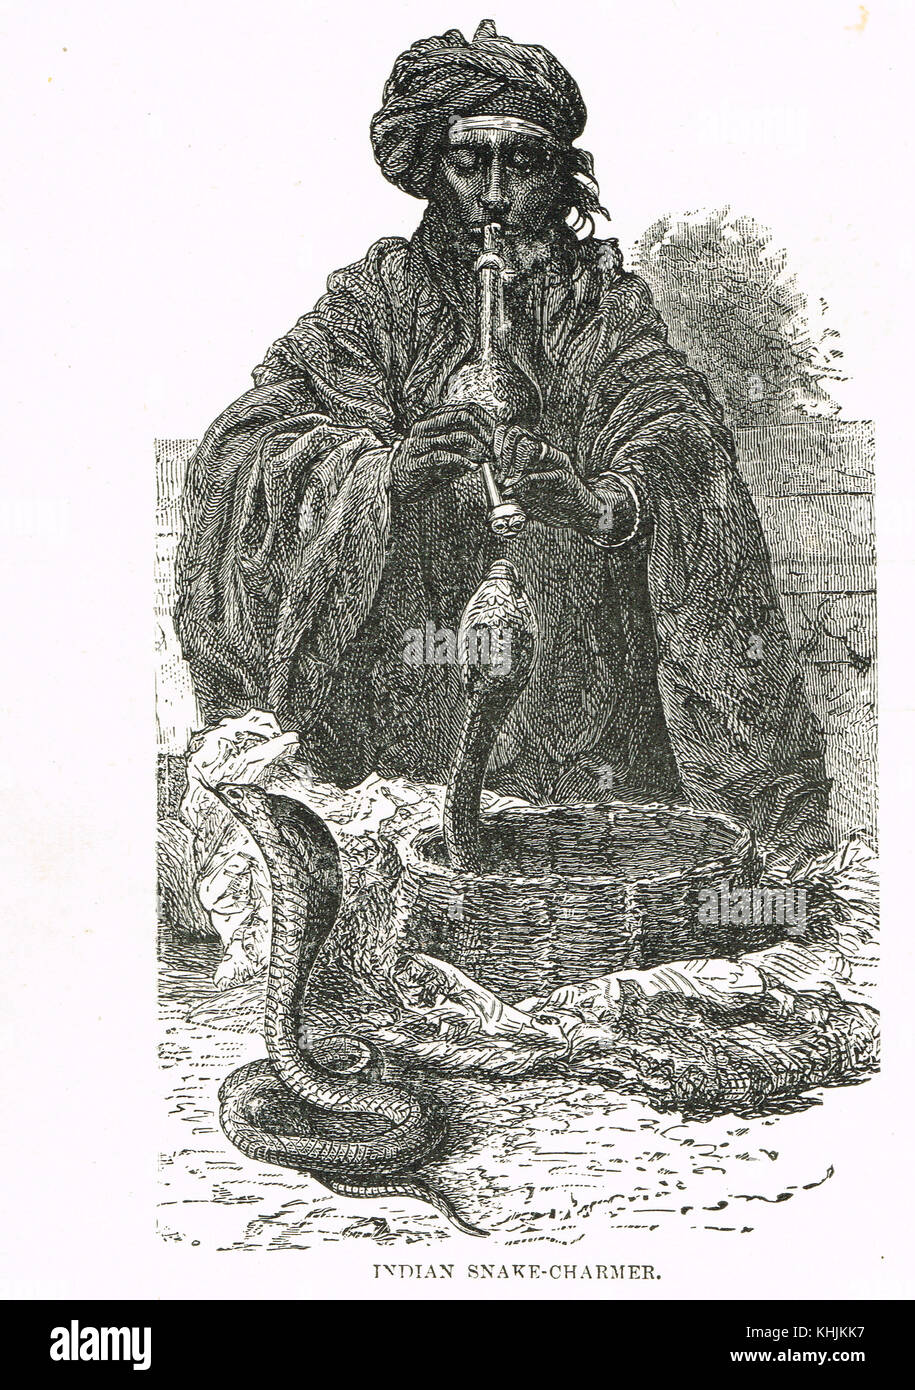 An Indian Snake Charmer, 19th Century Stock Photo